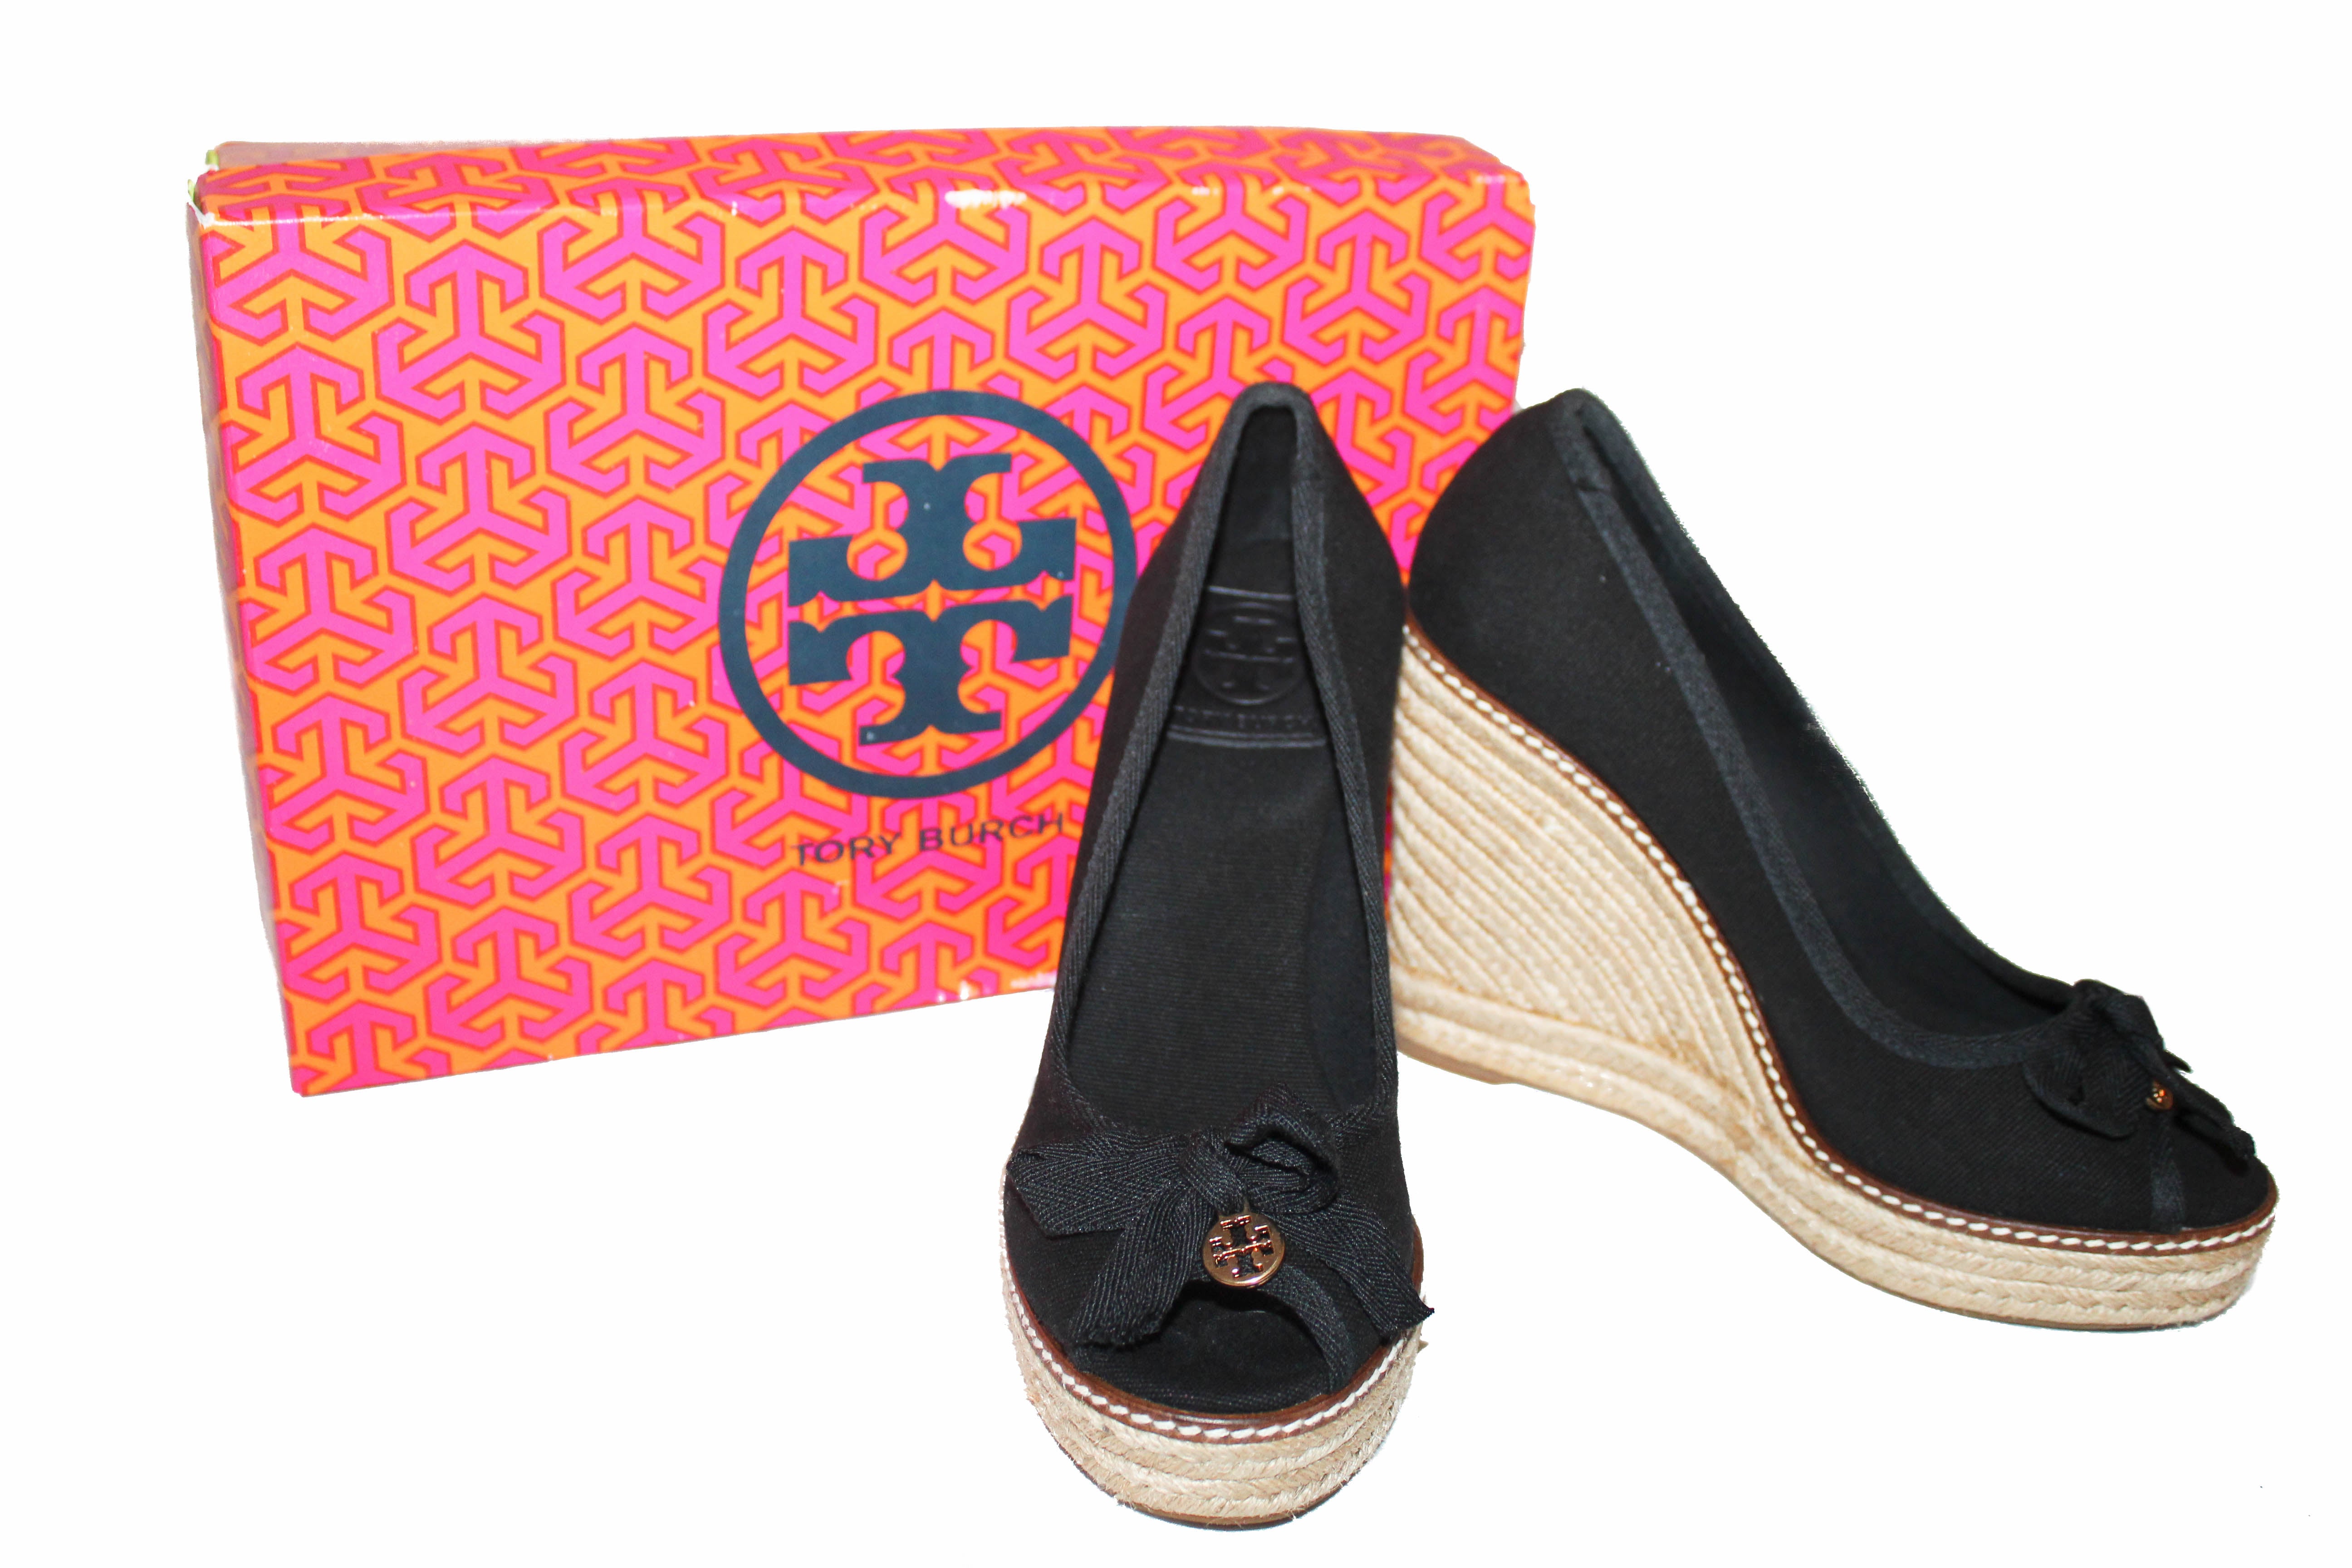 Authentic Tory Burch Black Canvas Jackie Espadrille 110mm Wedge Shoes Size 7